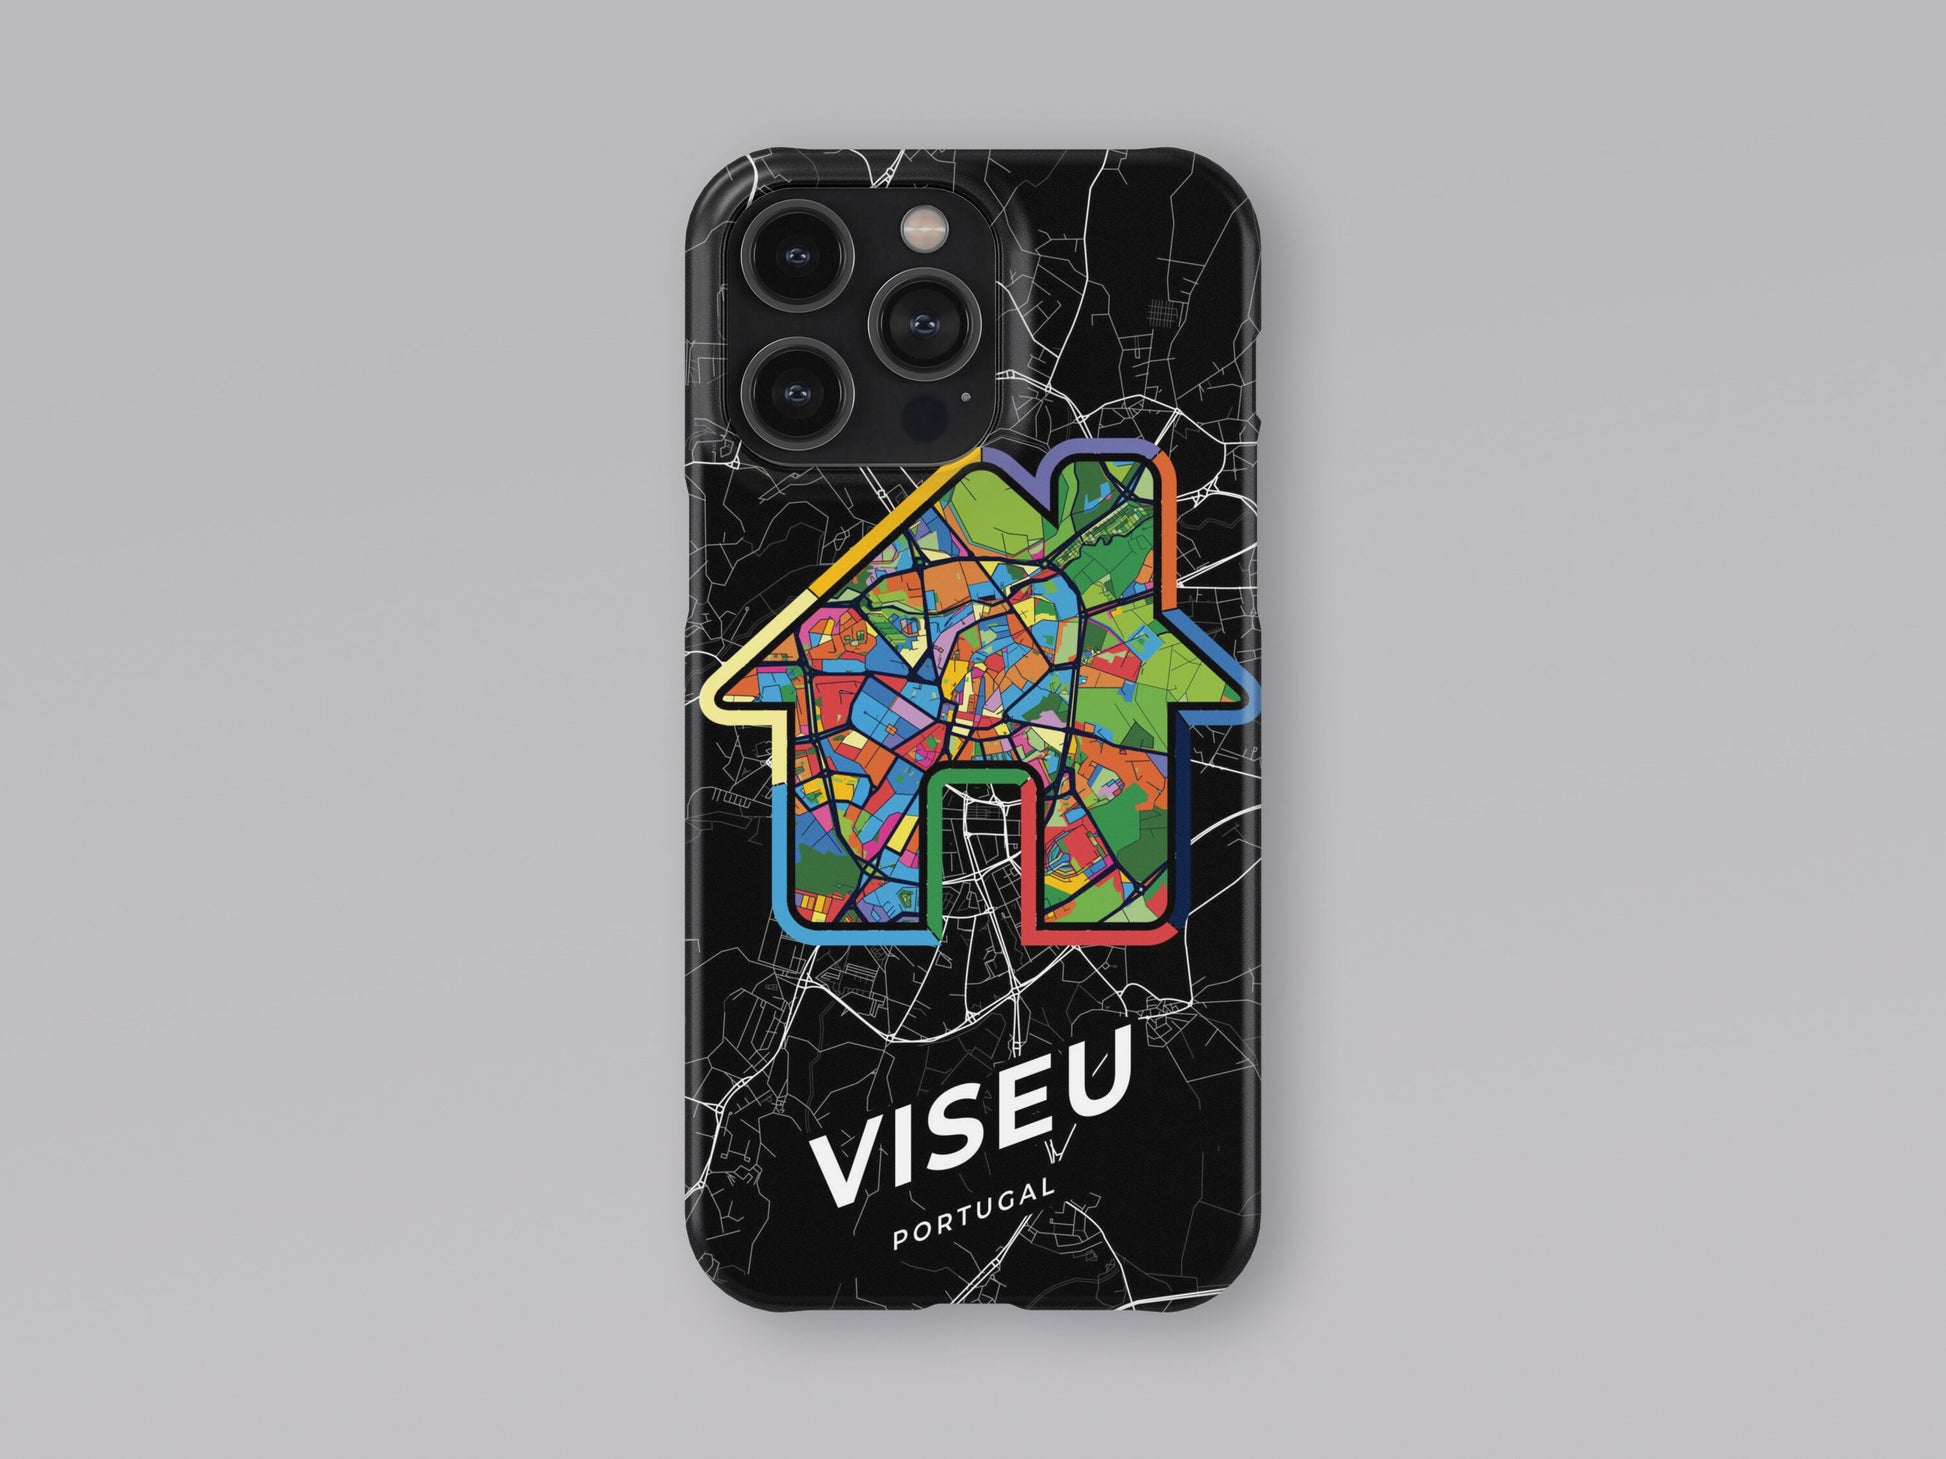 Viseu Portugal slim phone case with colorful icon 3